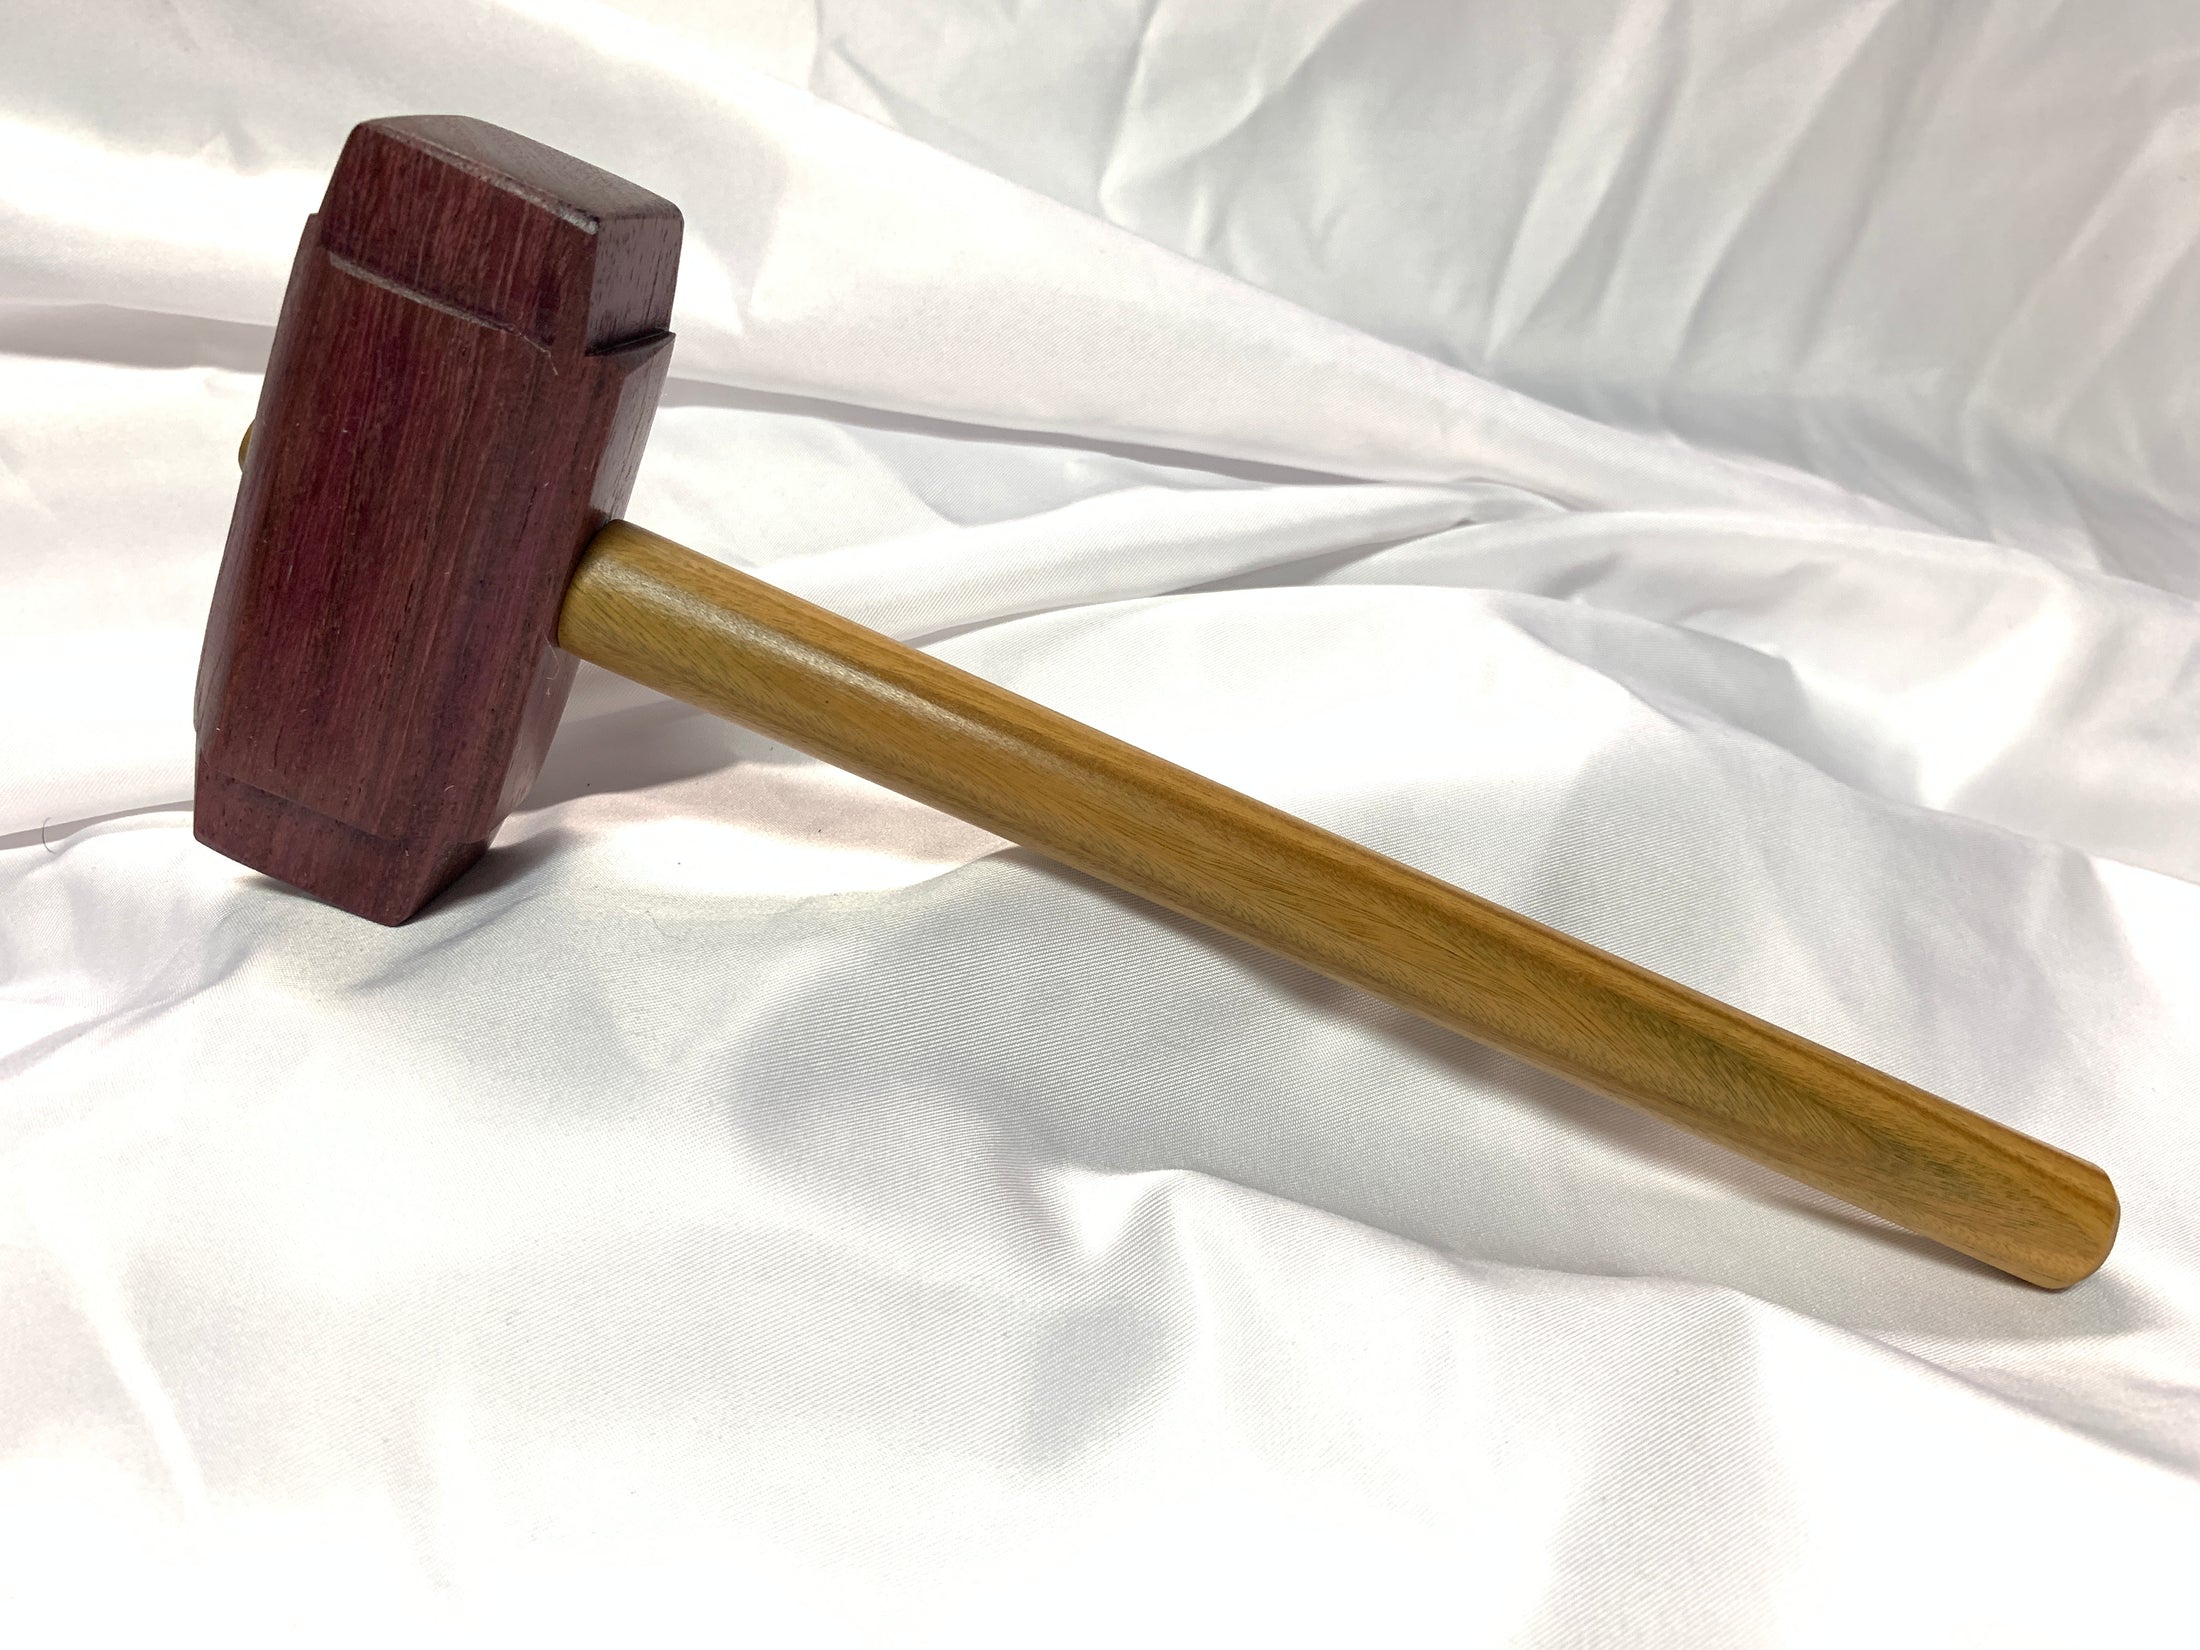 Thors Hammer Woodworking Mallet Purpleheart Head with Lignum Vitae Handle Kings Fine Woodworking